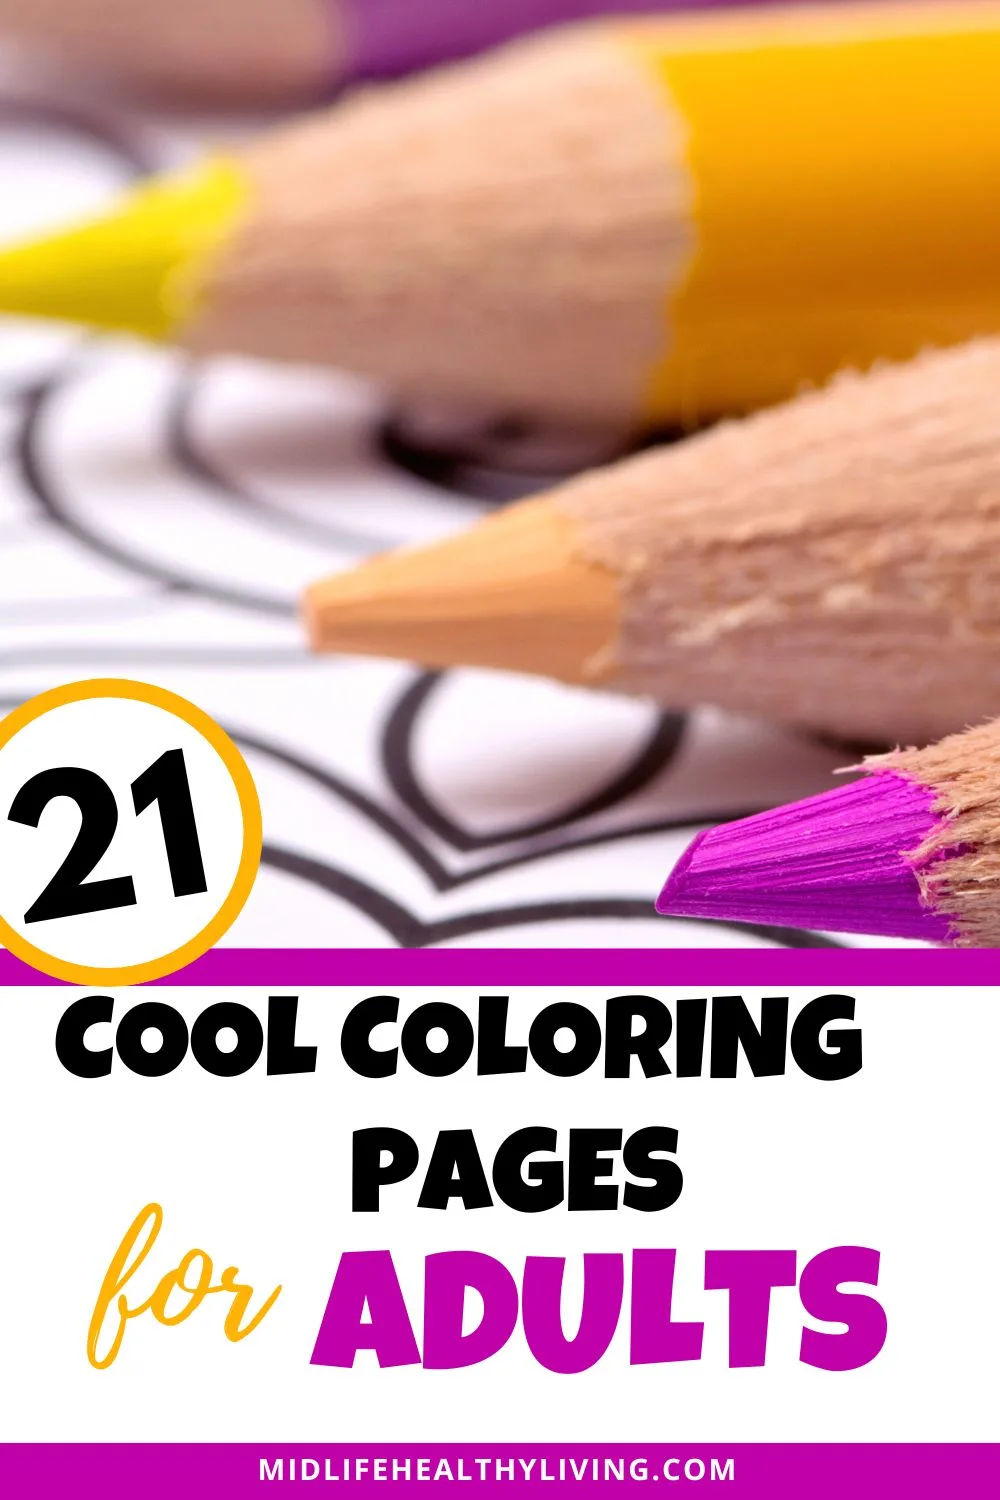 Page 22  Coloring Books Adult Images - Free Download on Freepik